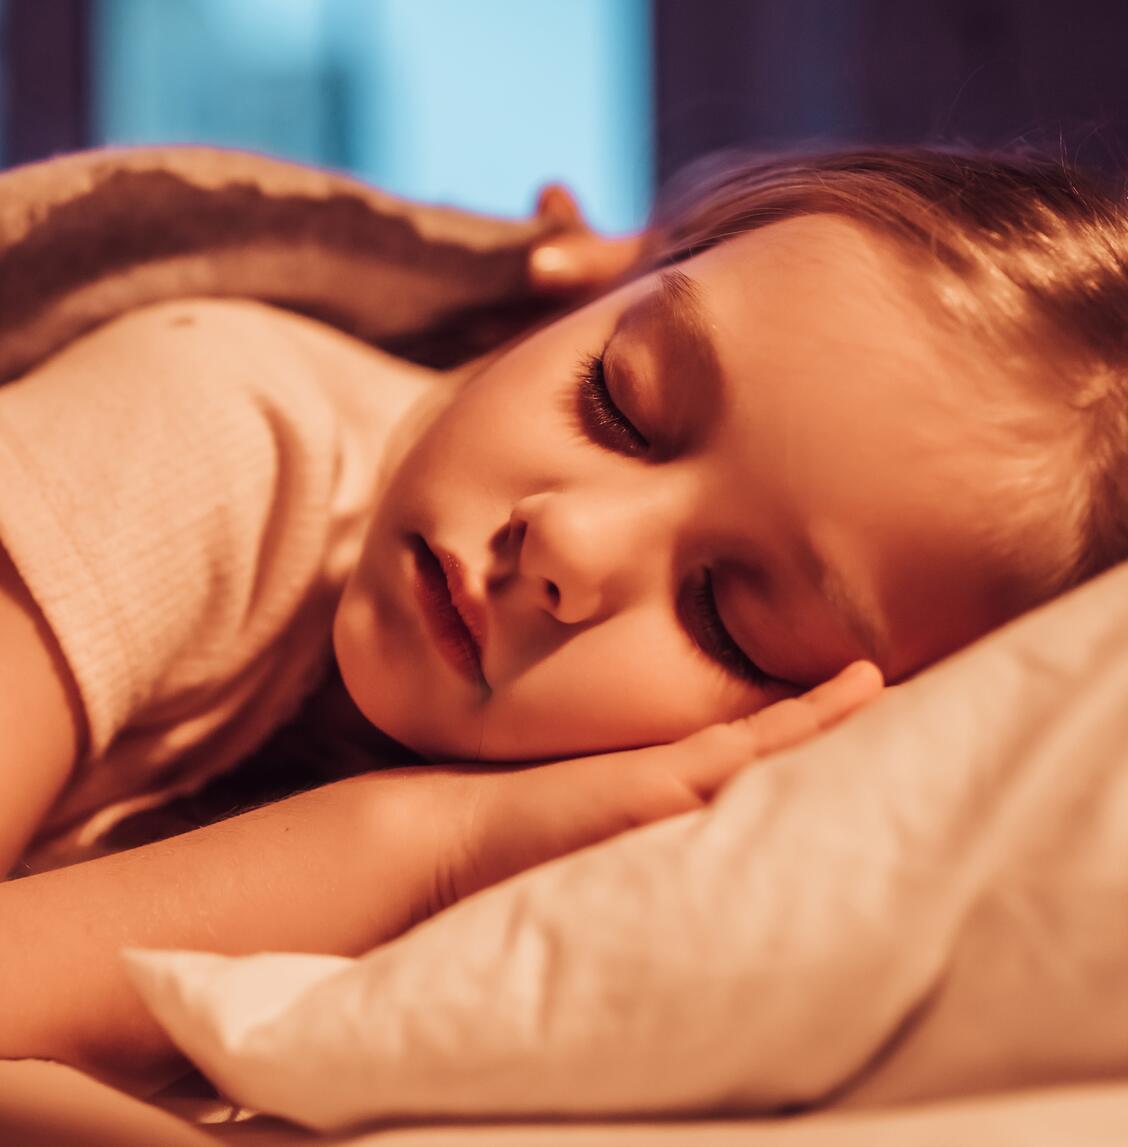 AD_LIFE-MOMENTS_LITTLE-GIRL-SLEEPING-NIGHT-TIME_LARGE_2021